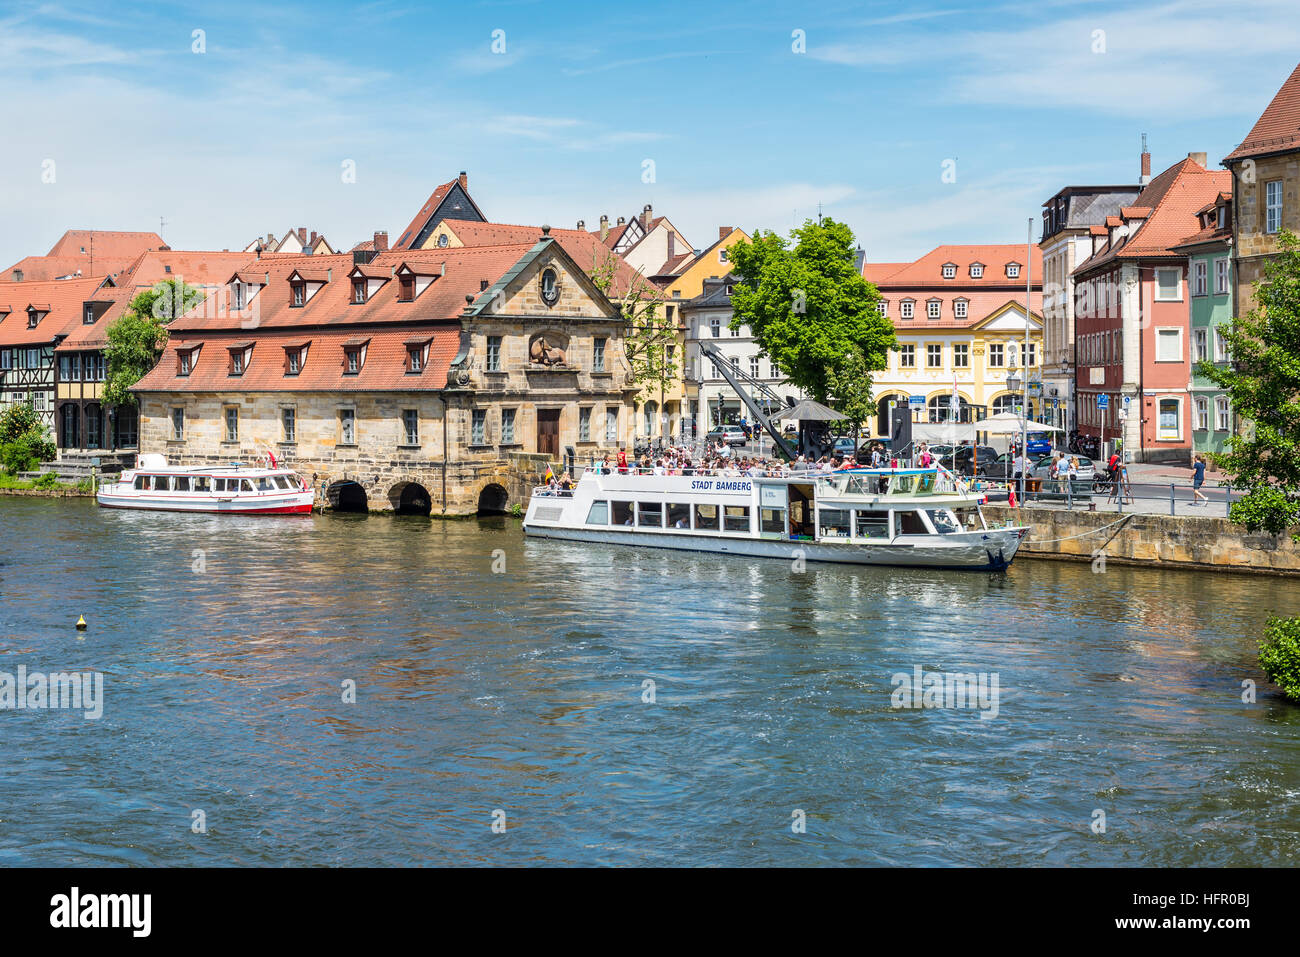 City sightseeing ship with tourists on Regnitz river in Bamberg, Germany Stock Photo